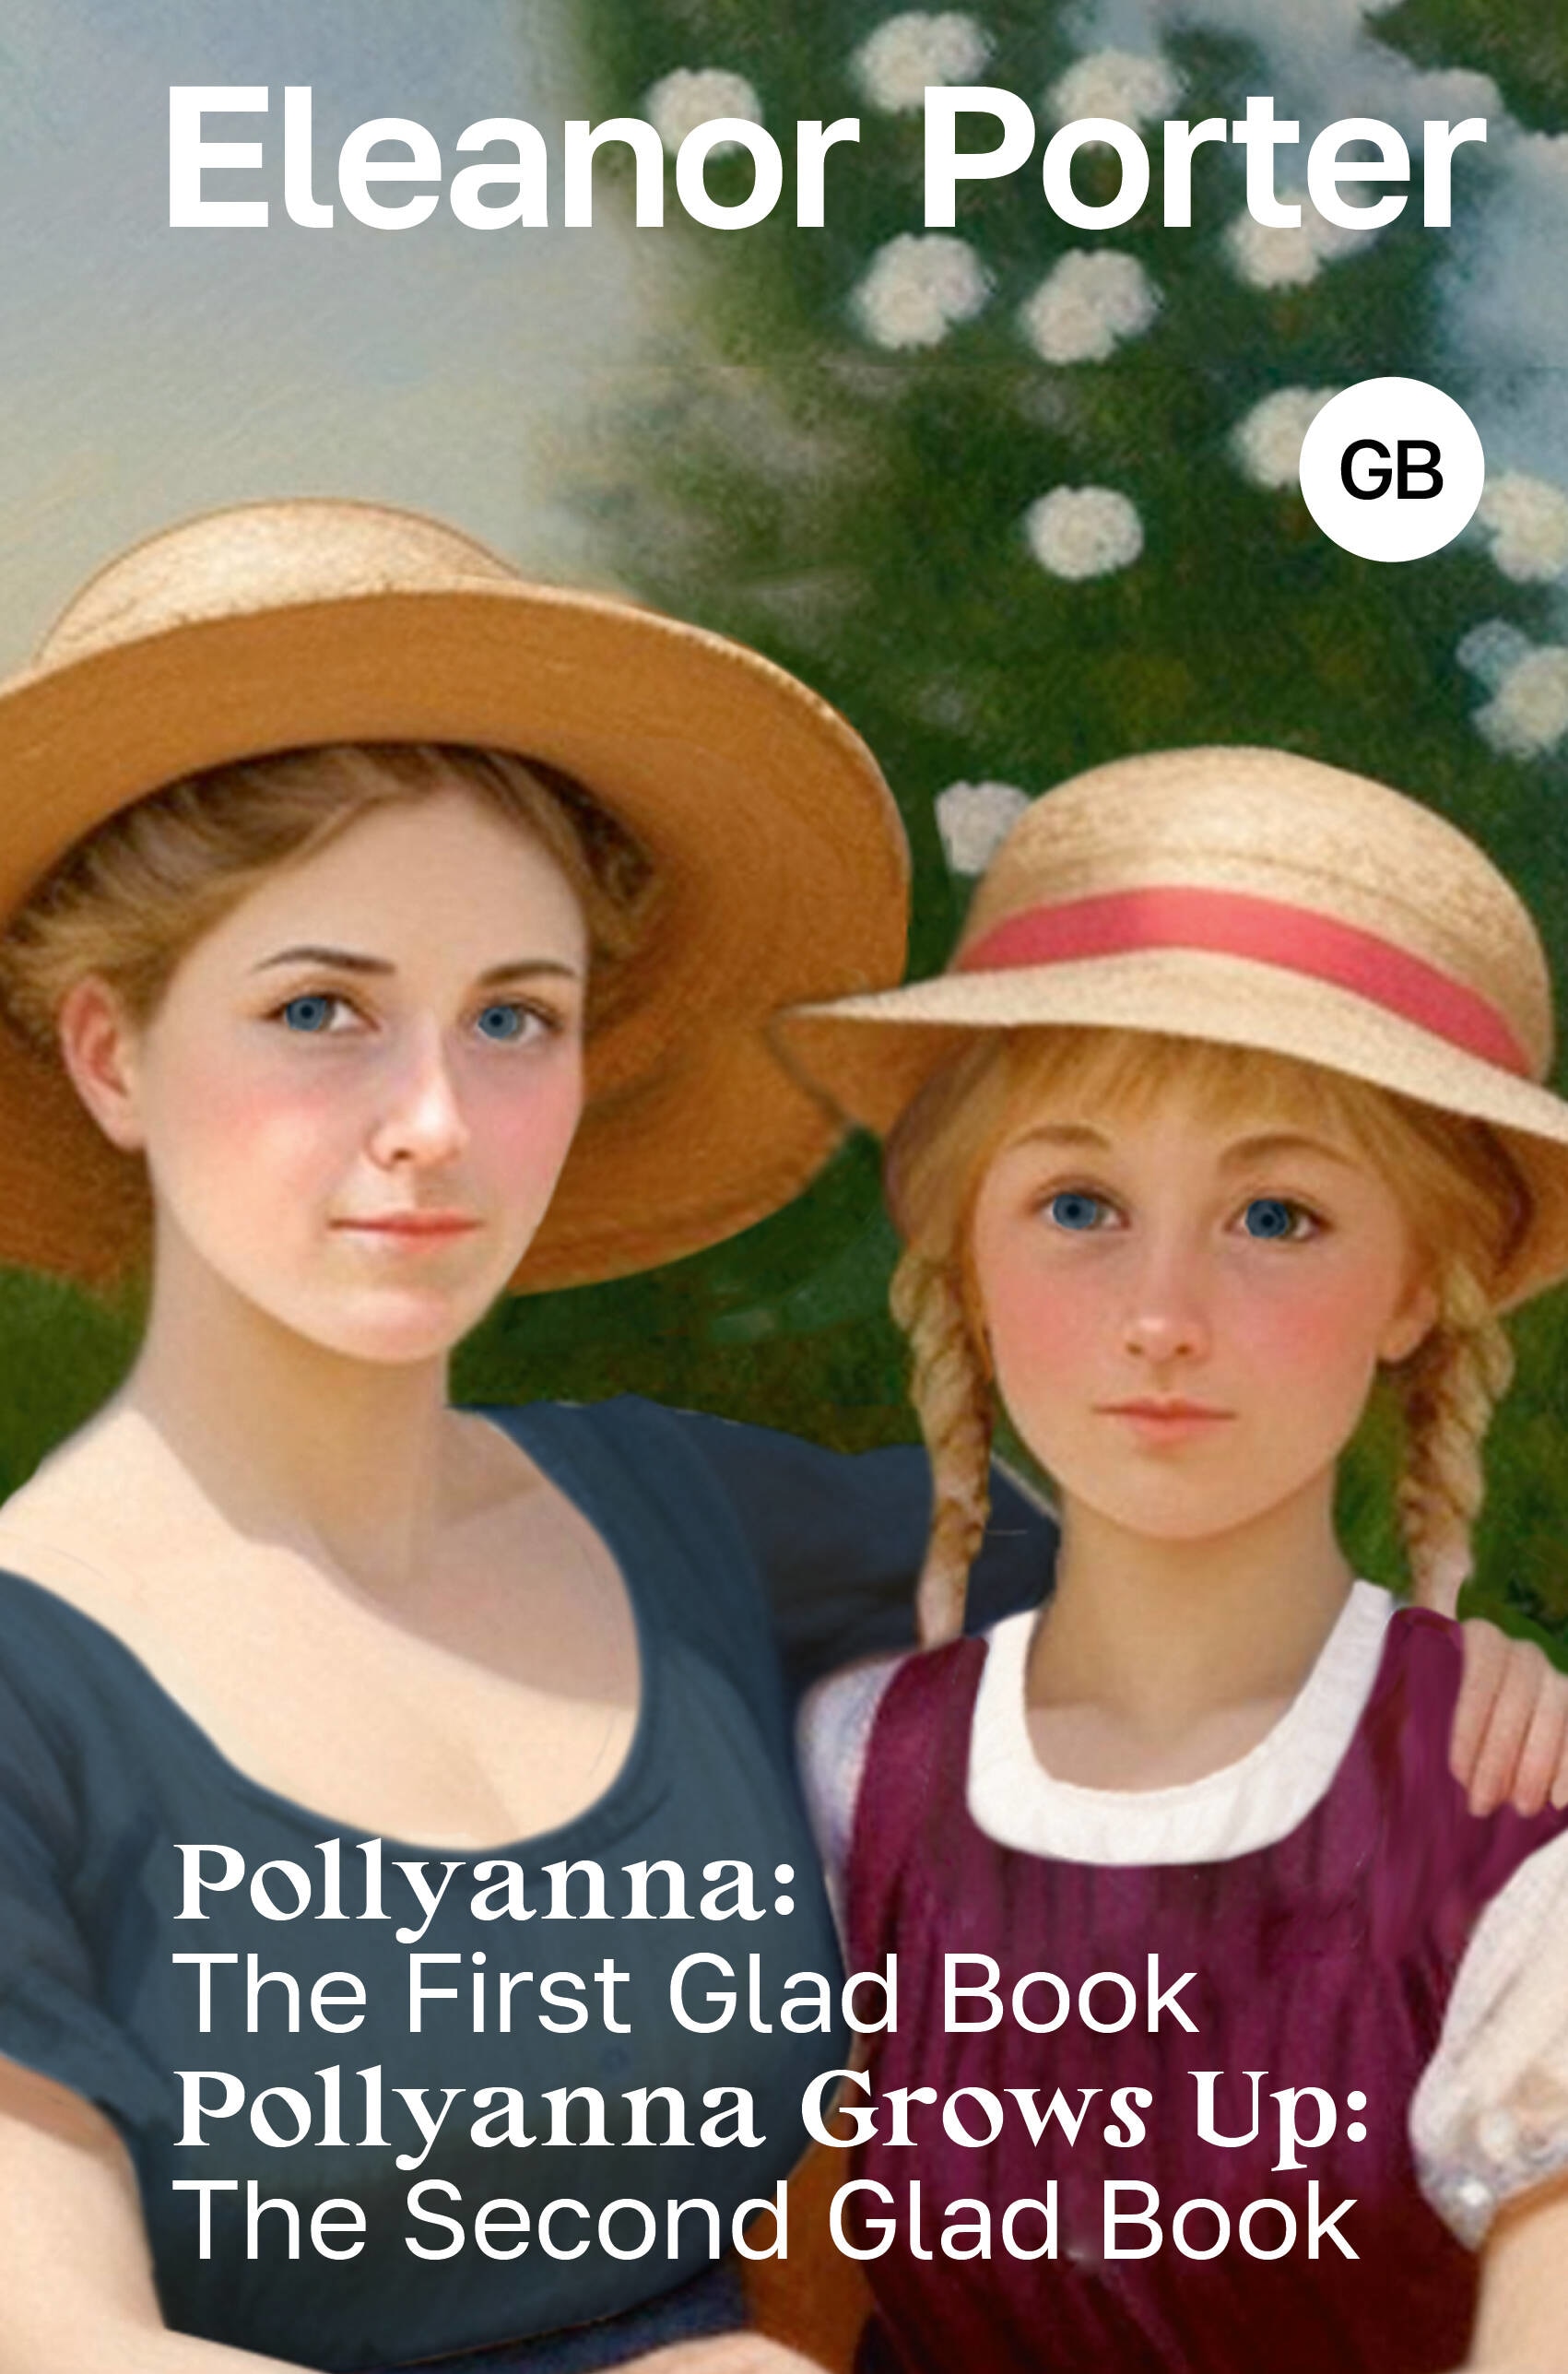 Book “Pollyanna: The First Glad Book. Pollyanna Grows Up: The Second Glad Book” by Элинор Портер — 2023